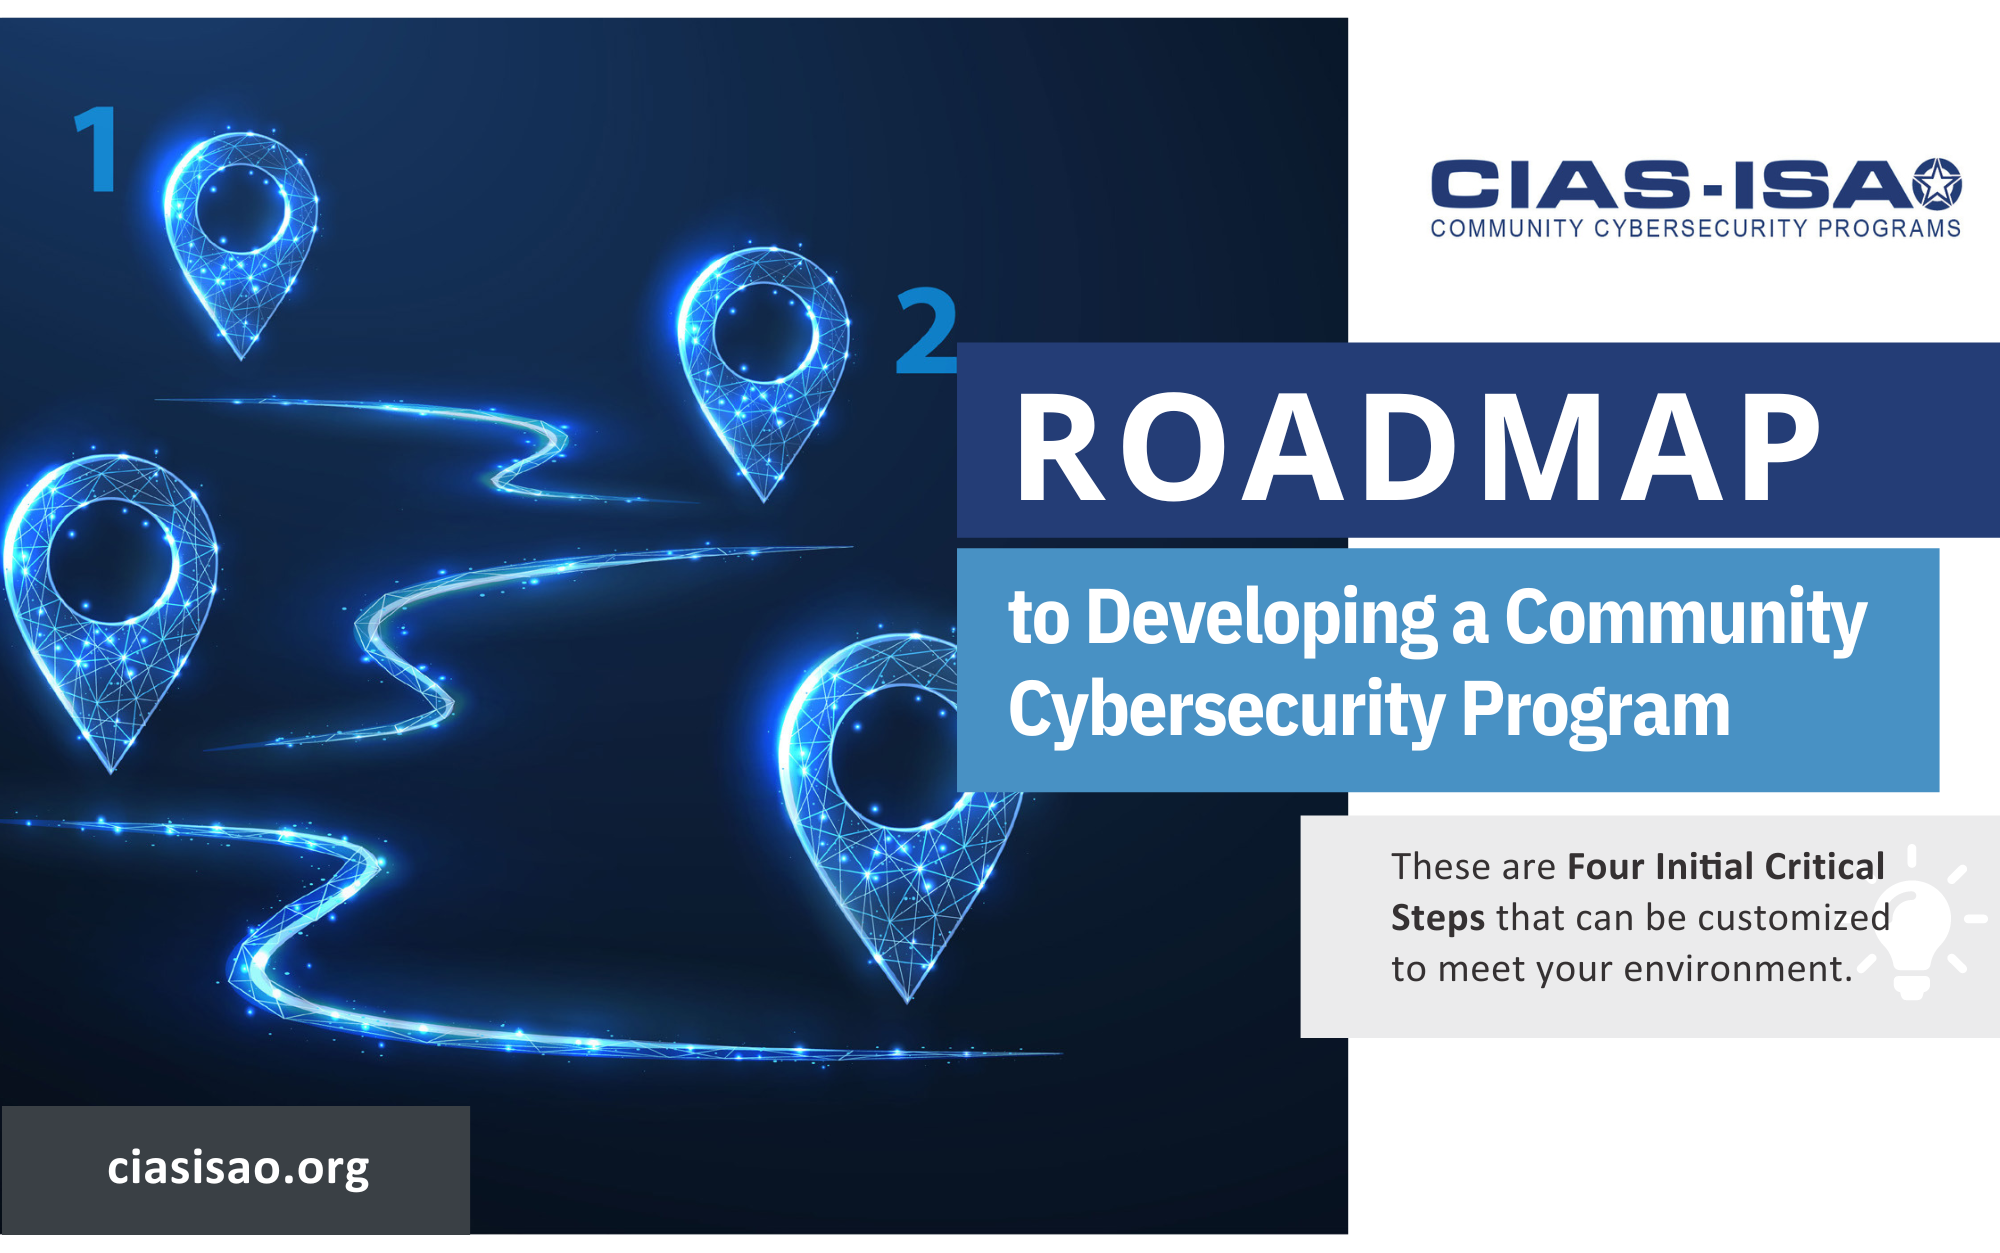 A Roadmap to Developing Your Community Cybersecurity Program